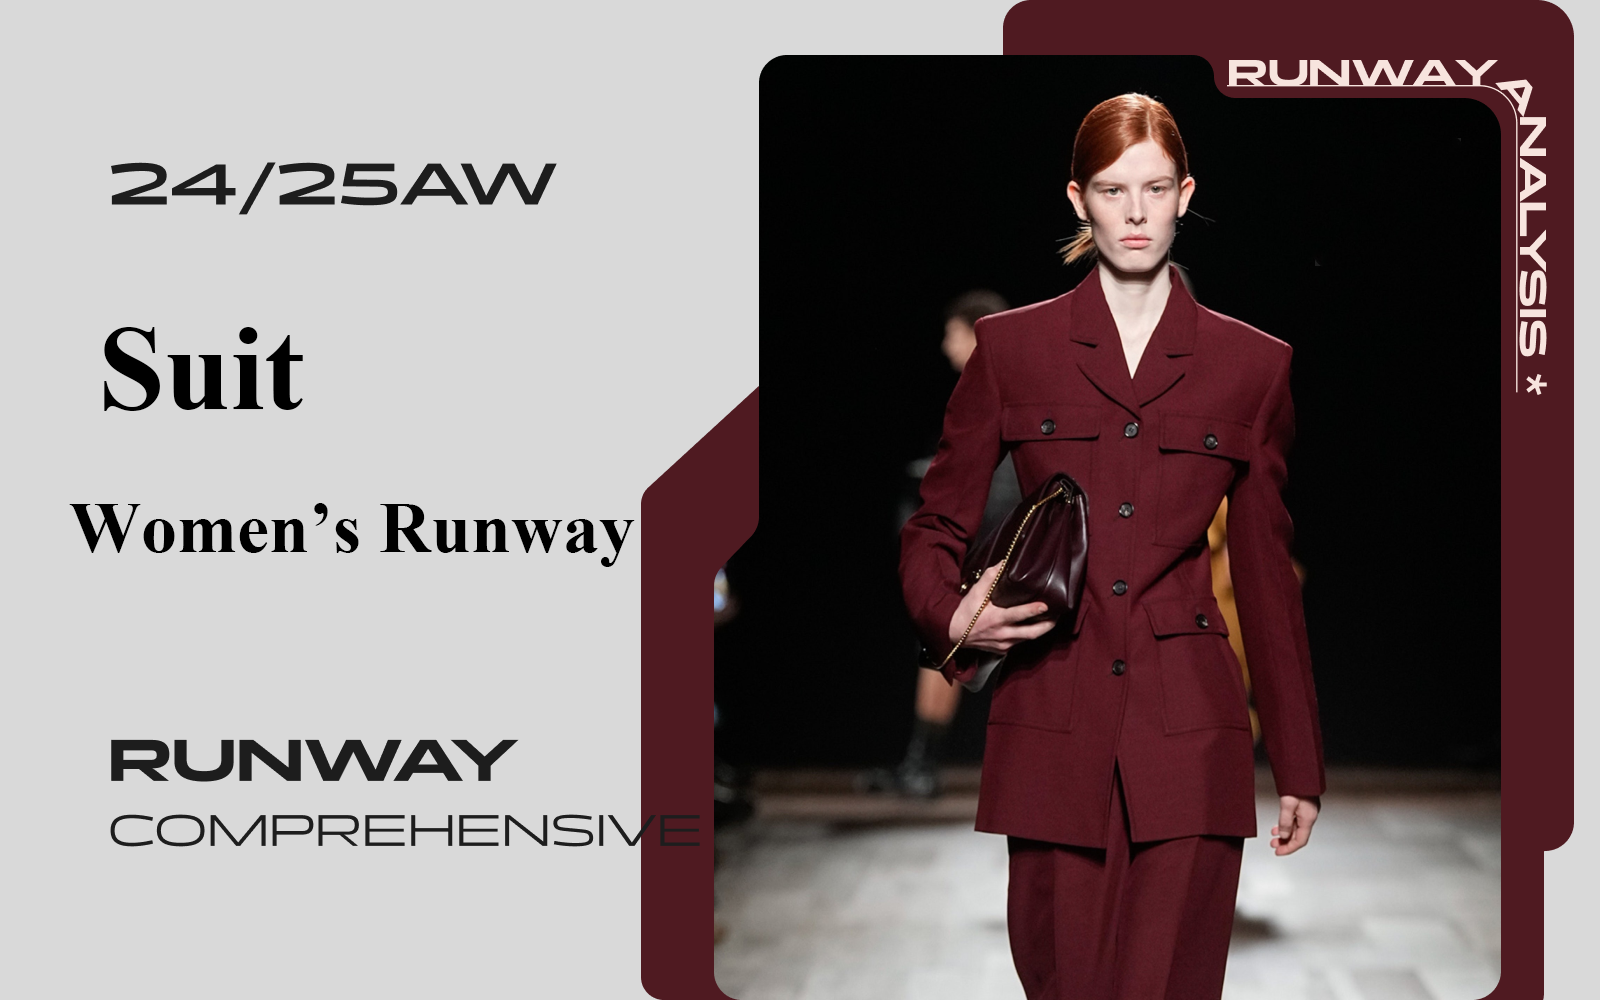 Suit -- The Comprehensive Analysis of A/W 24/25 Women's Runway